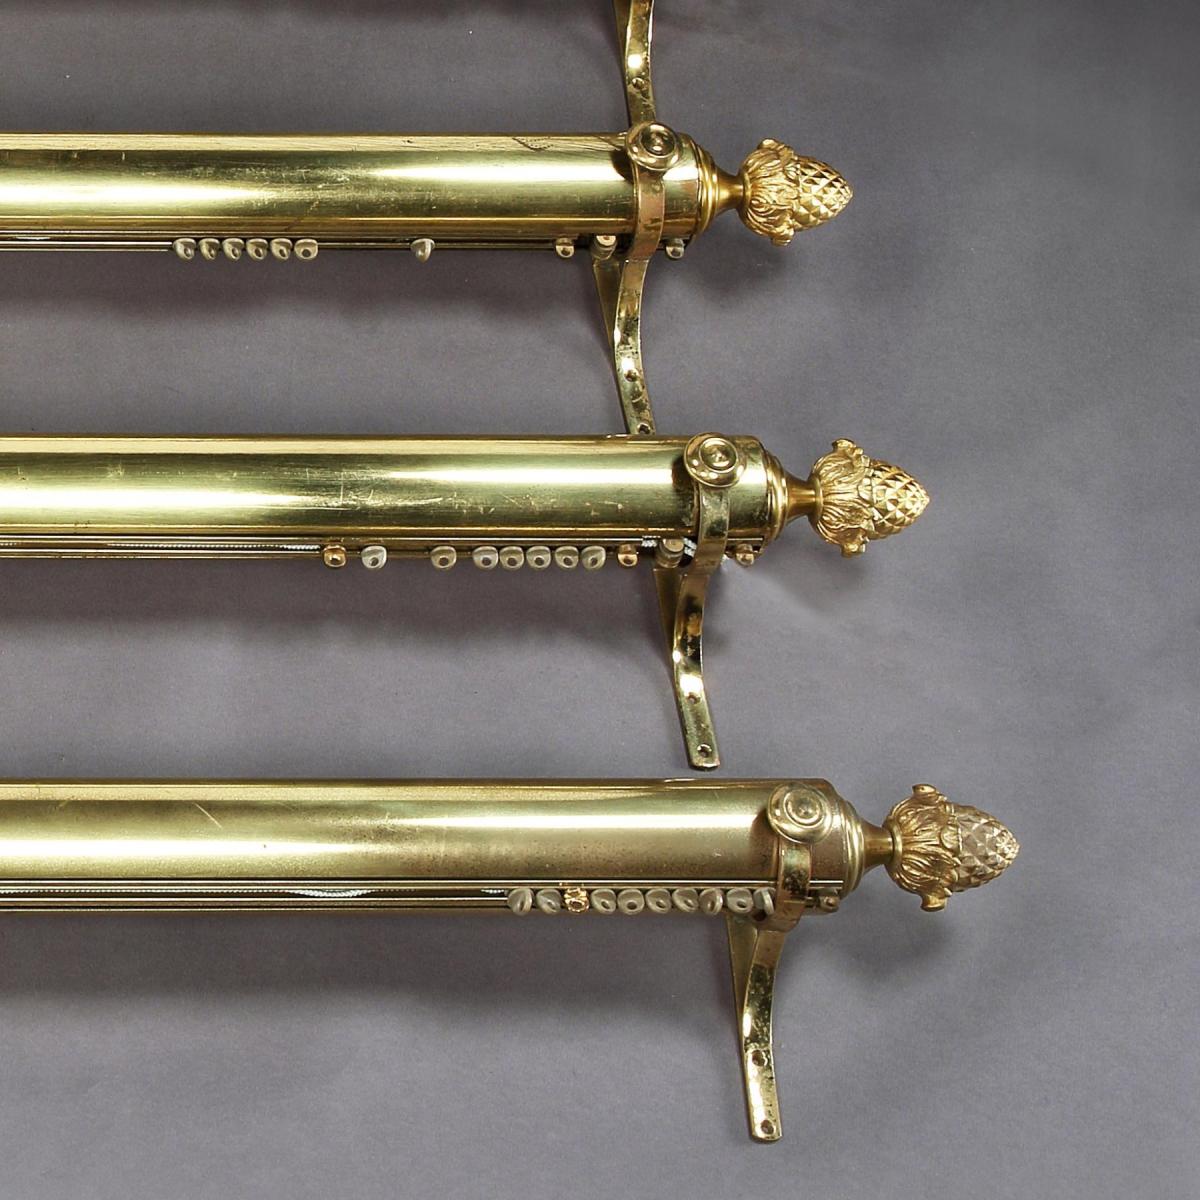 Set of Five Brass Curtain Rails Removed From Downing Street